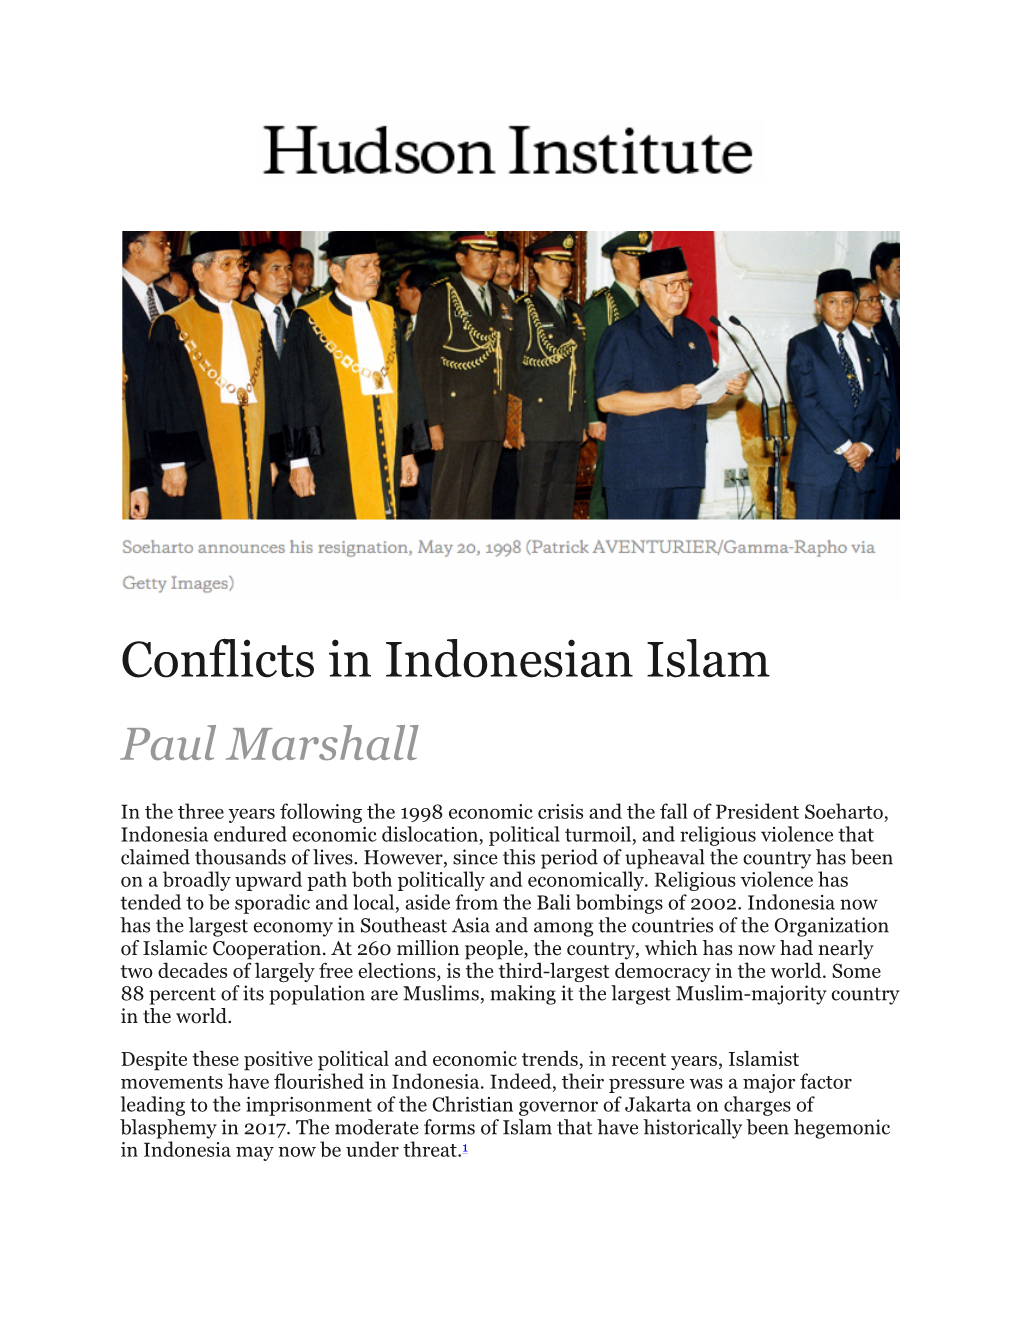 Conflicts in Indonesian Islam Paul Marshall